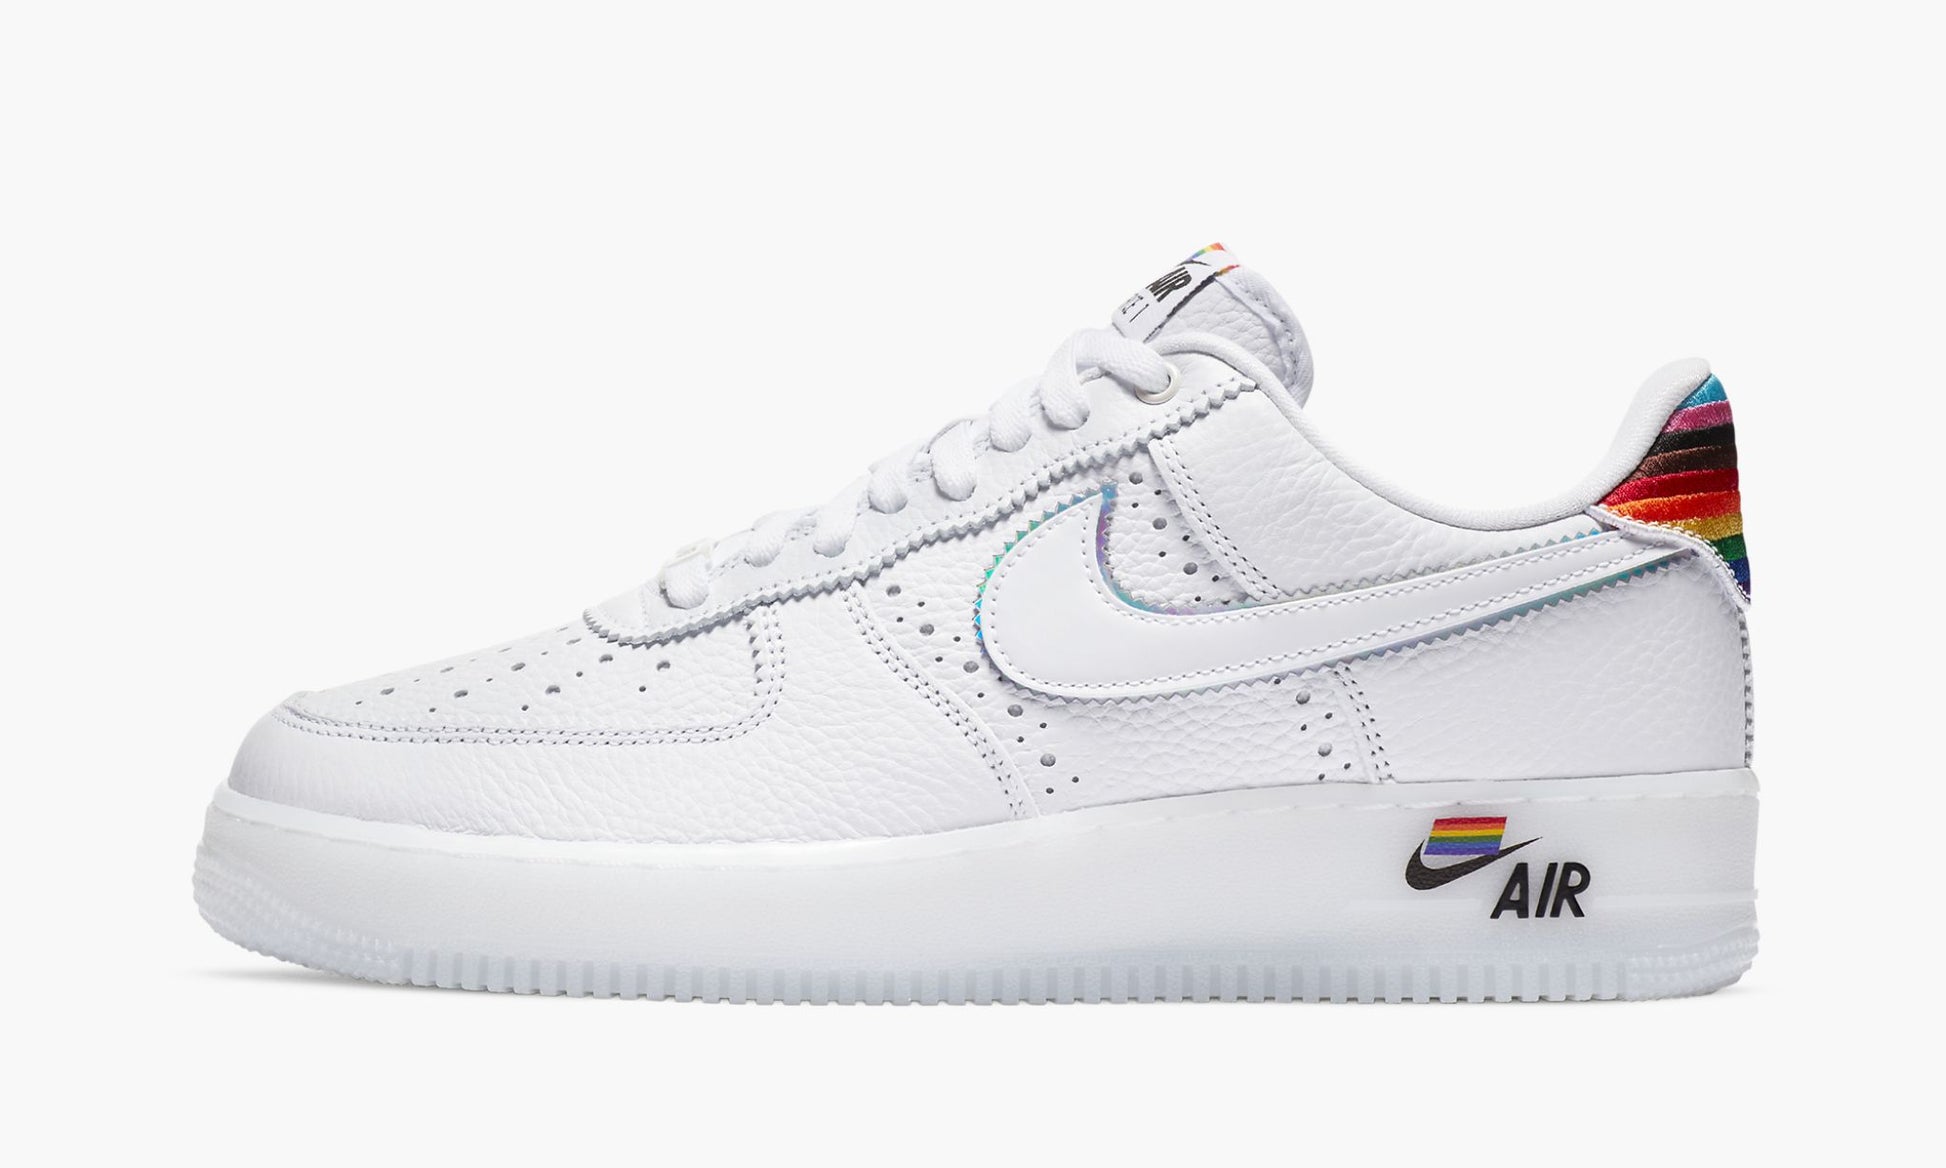 Air Force 1 Low "Be True 2020"